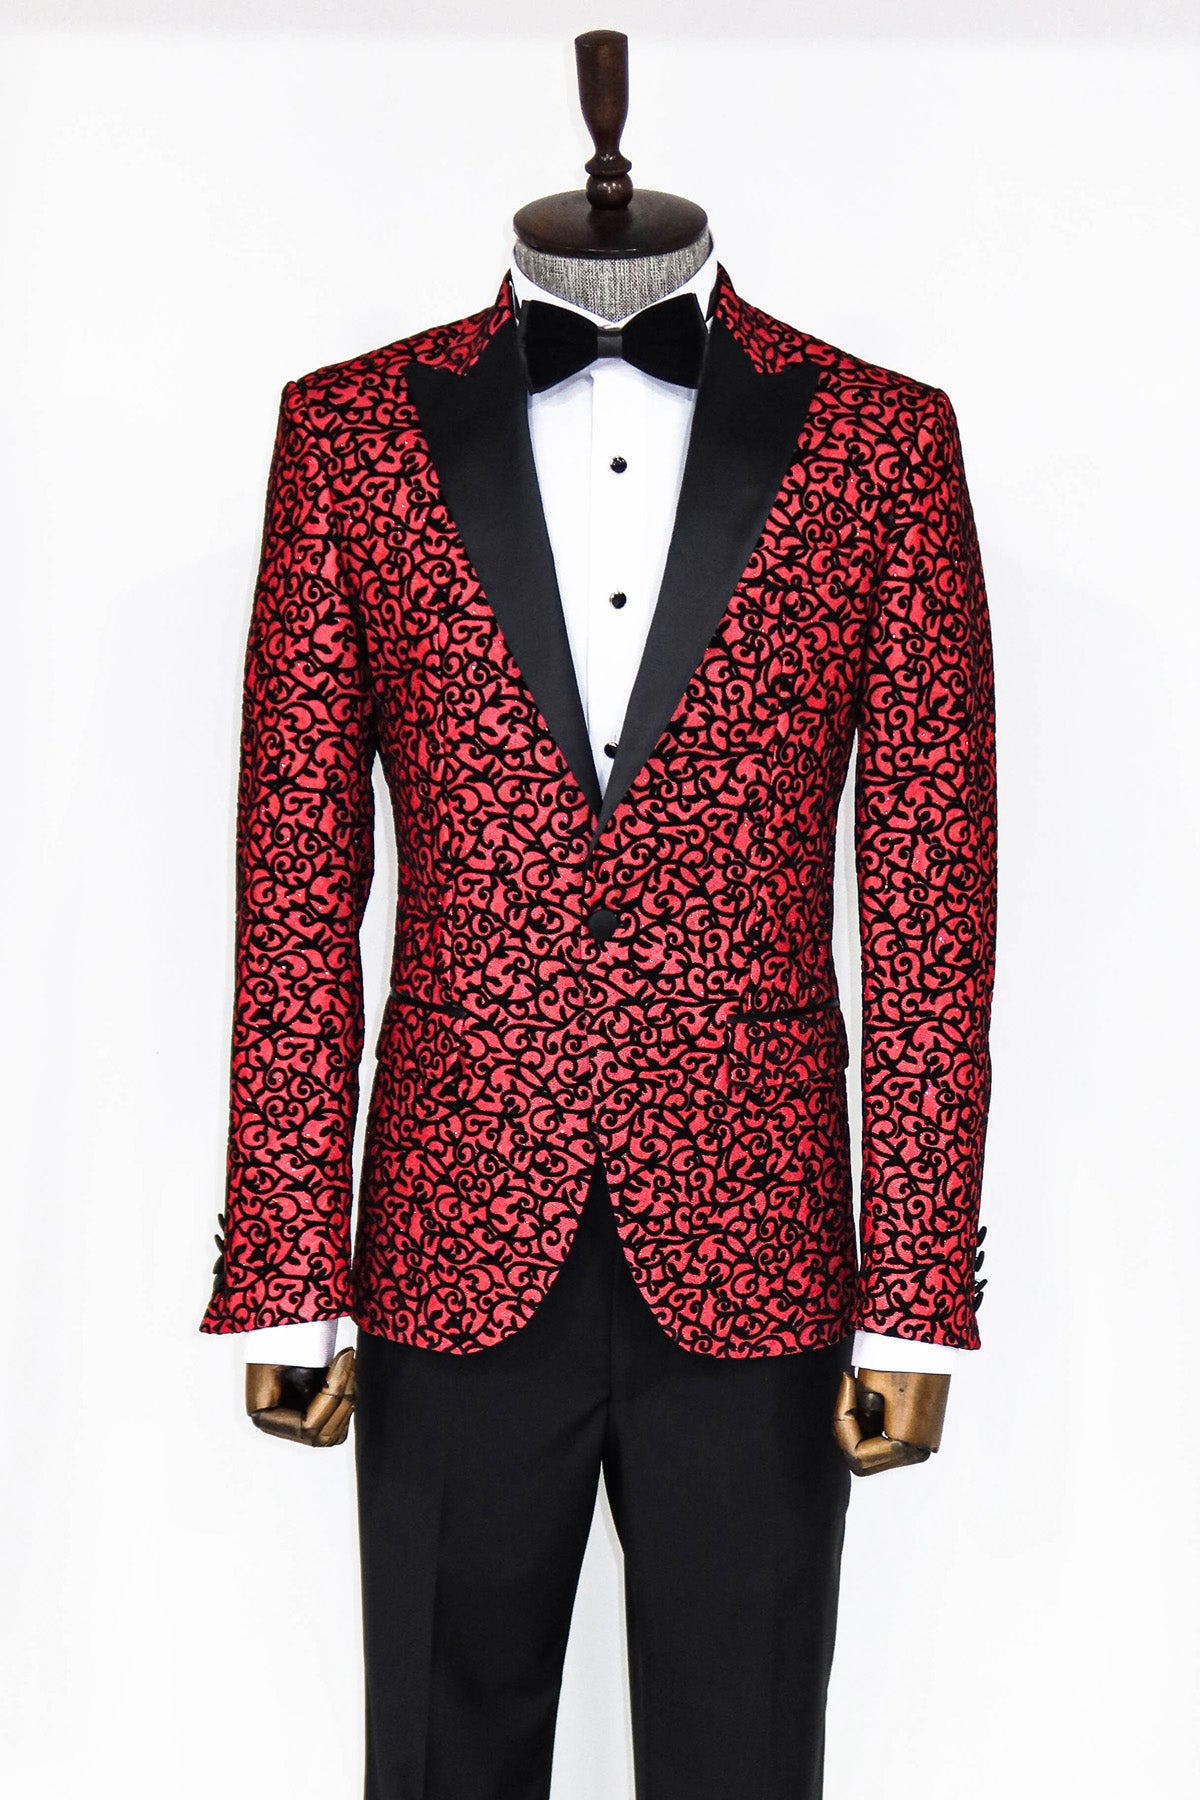 Red Sparkle Black Pattern Prom Blazer, tailored slim fit design, perfect for prom and formal events, available at KCT Menswear with free shipping